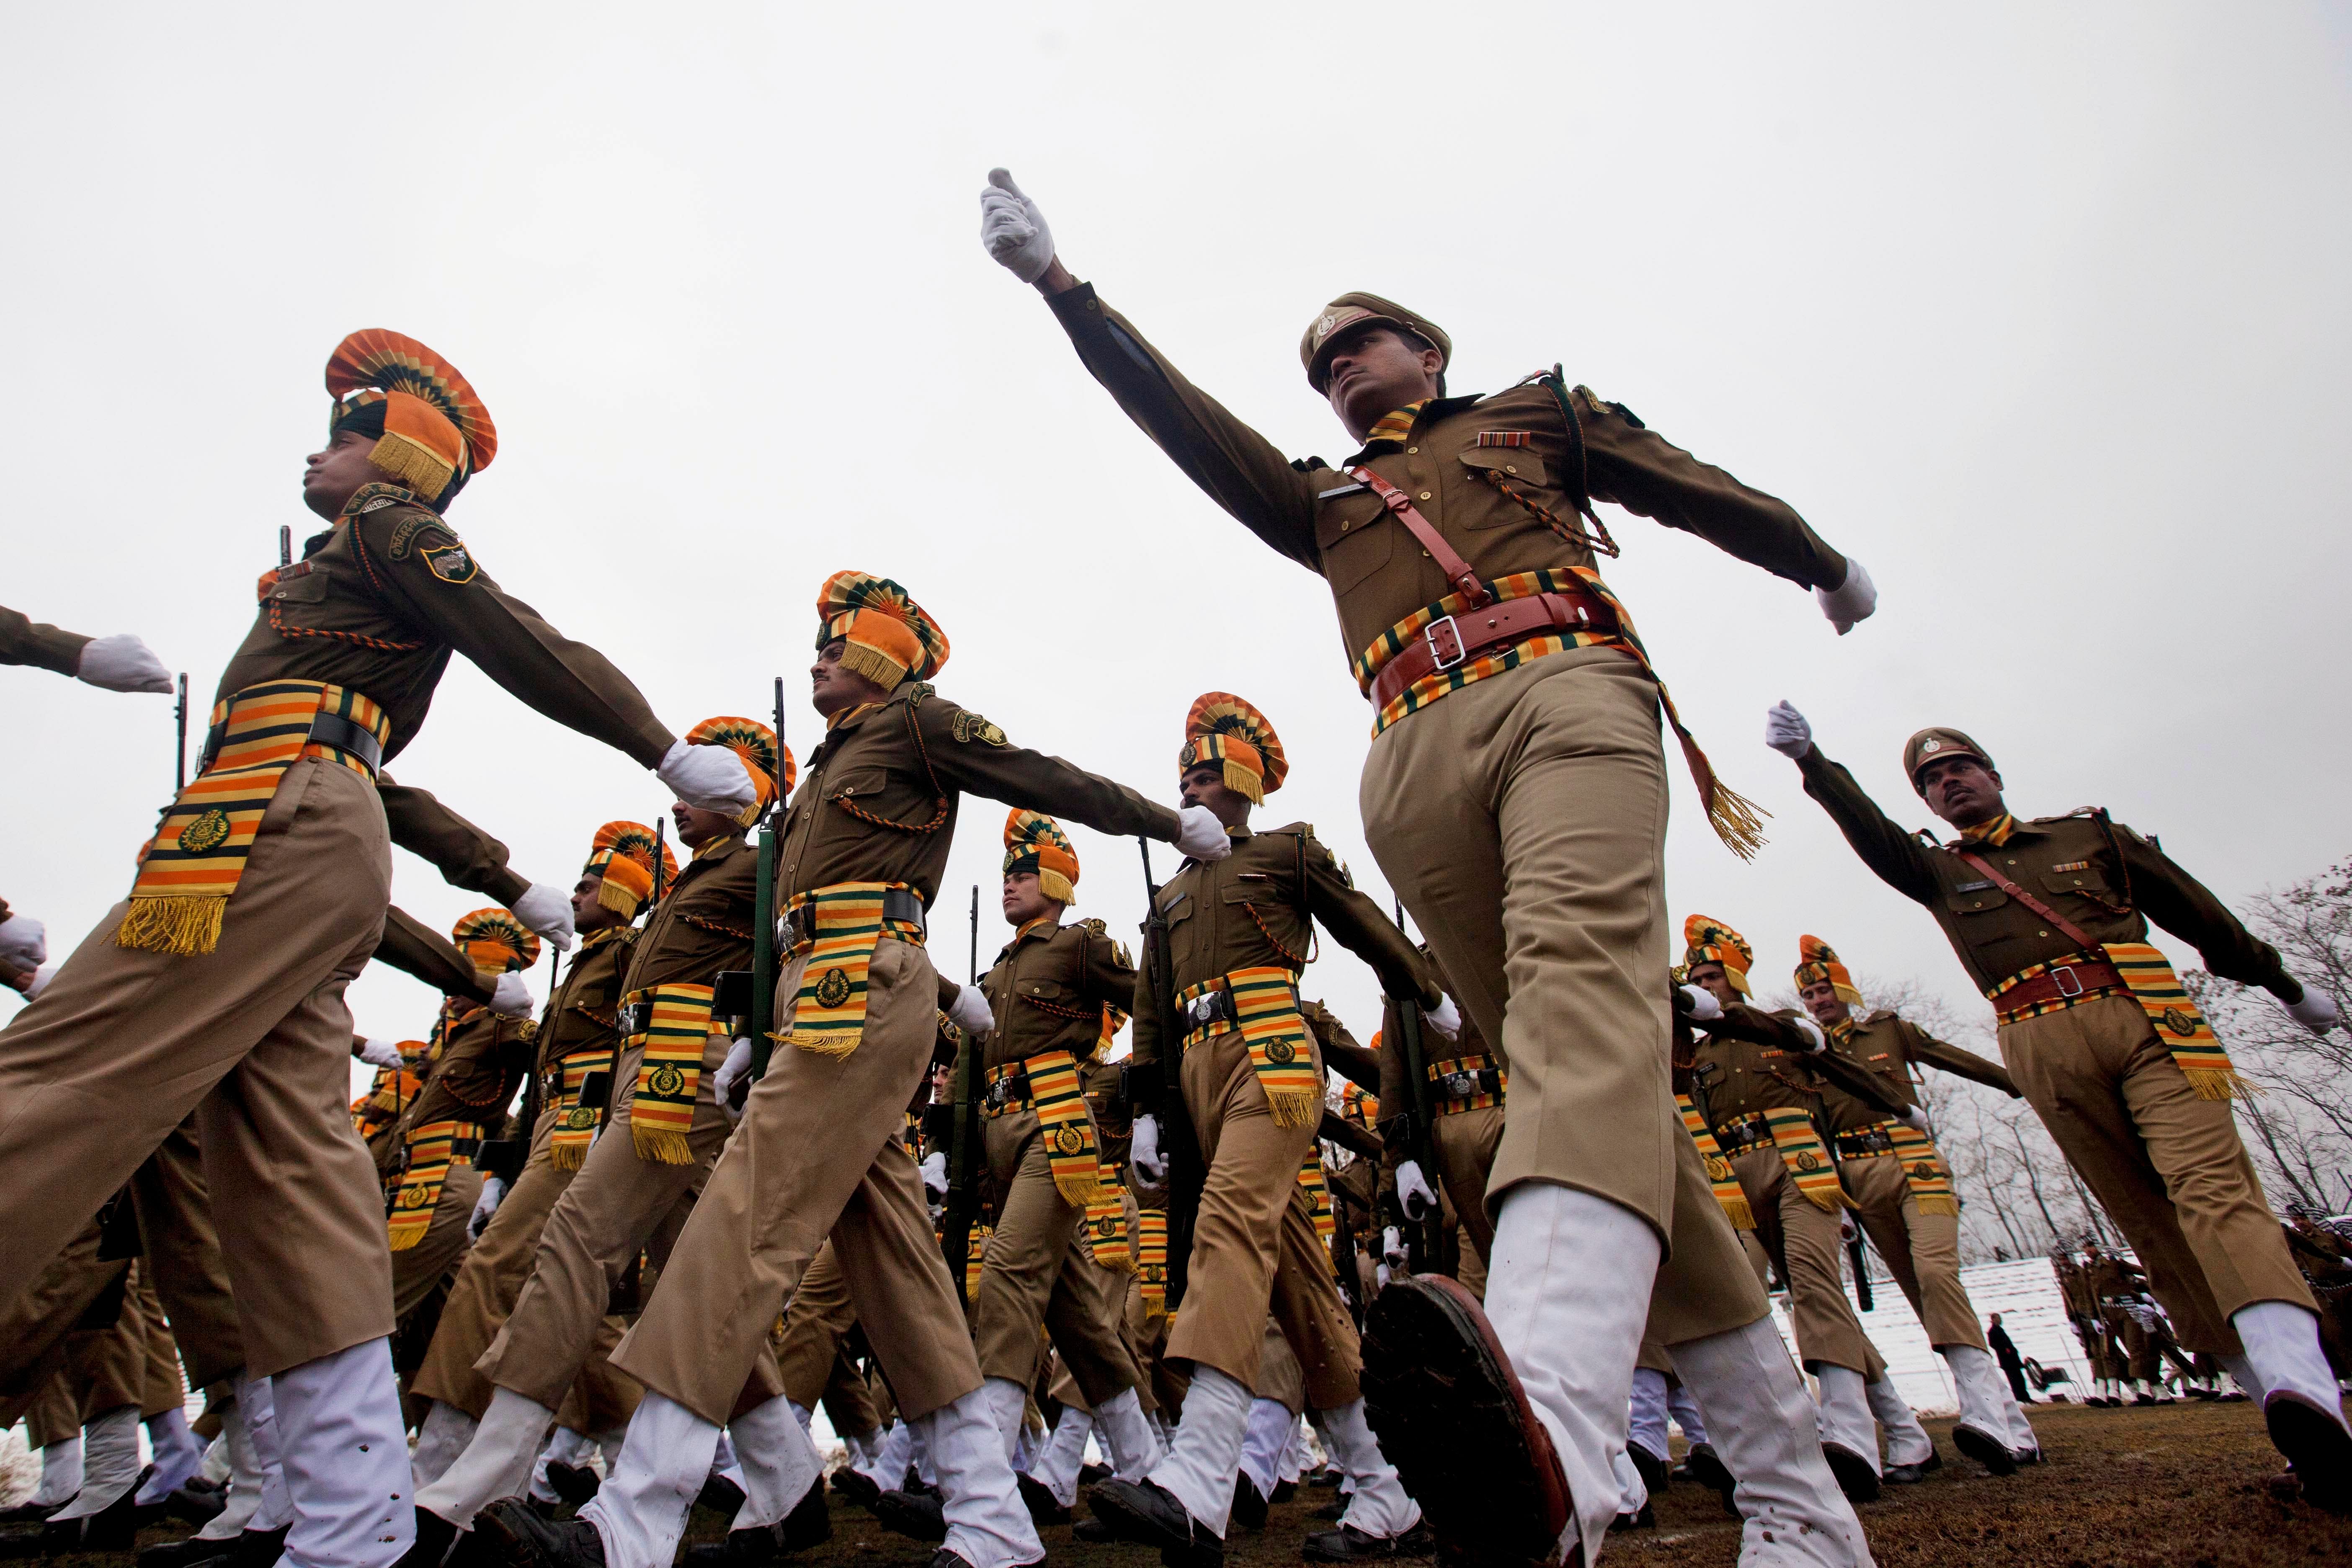 Under an overcast sky on a bitterly cold morning, India's 65th Republic Day parade Sunday showcased the country's military might and rich cultural diversity, with Japanese Prime Minister Shinzo Abe - the chief guest - keenly observing the 90-minute proceedings. AP